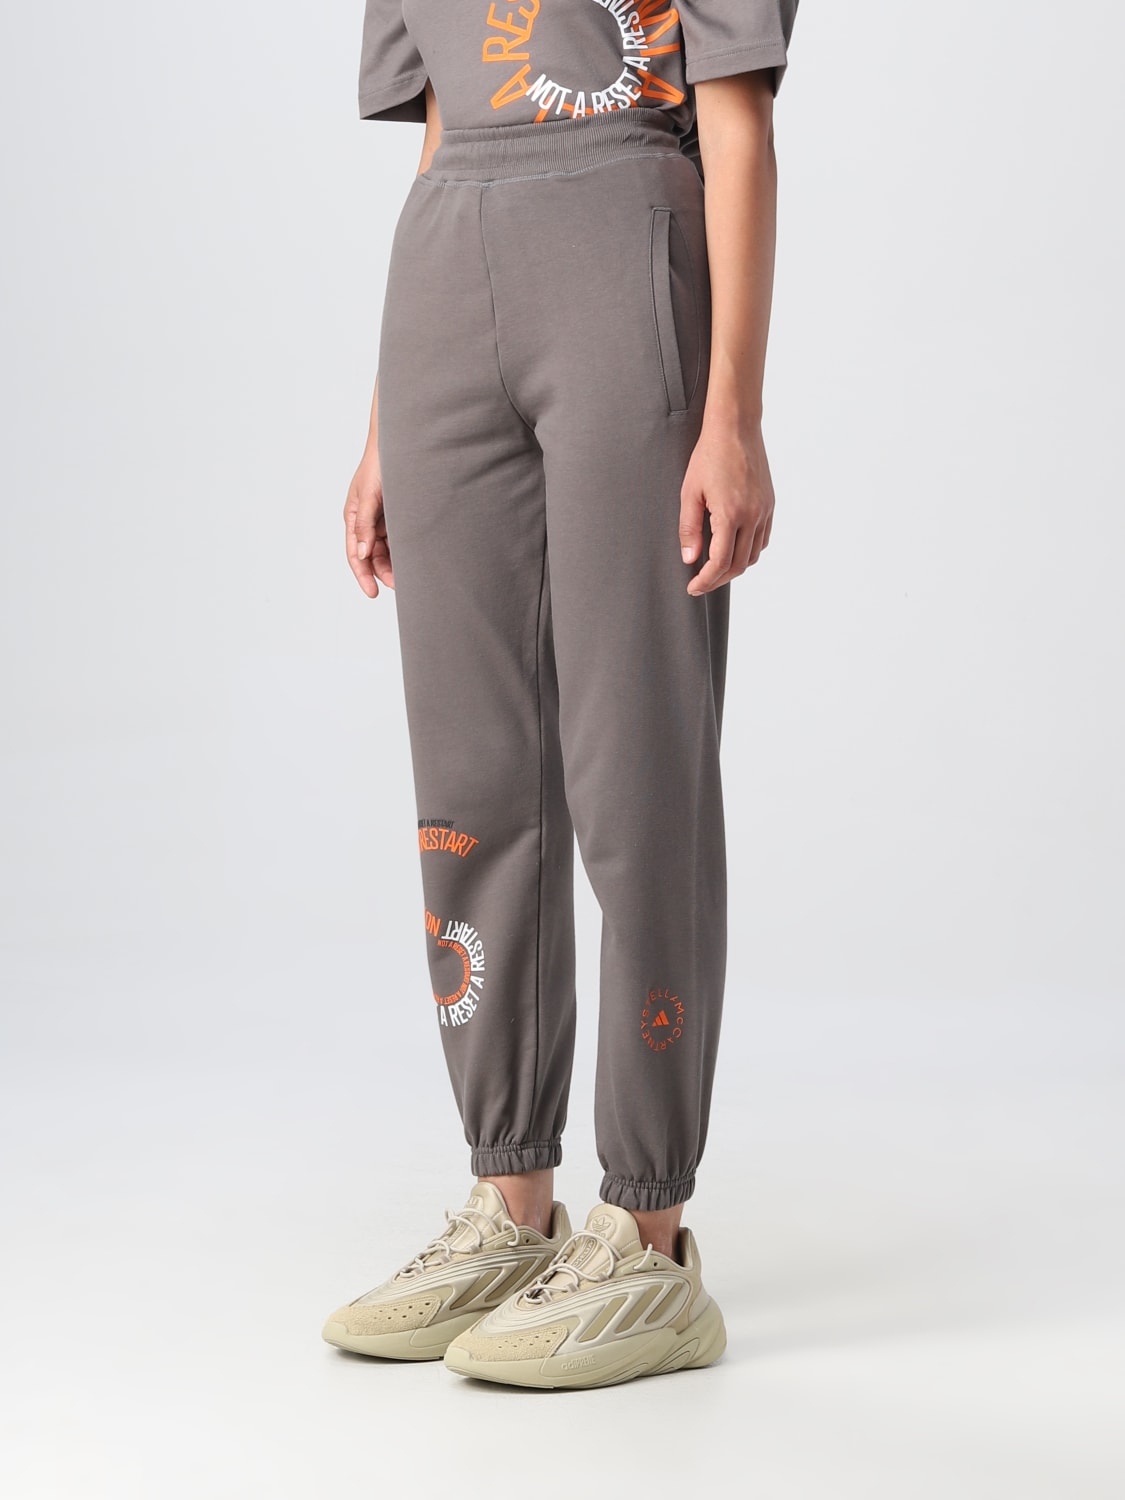 Adidas By Stella Mccartney Outlet: pants for woman - Grey | Adidas